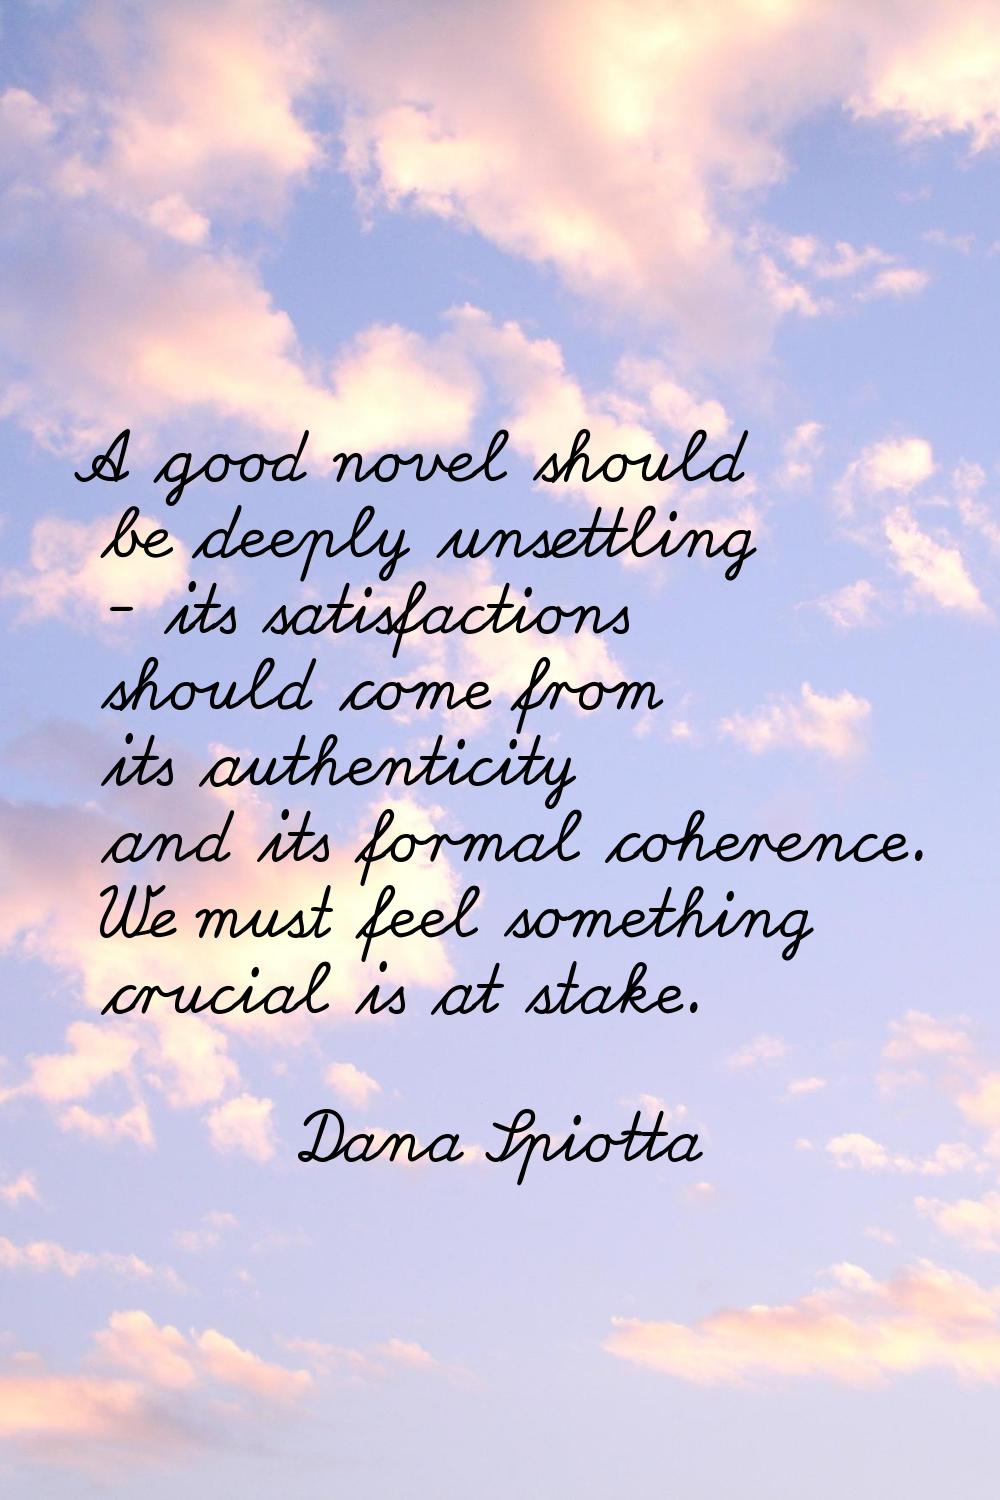 A good novel should be deeply unsettling - its satisfactions should come from its authenticity and 